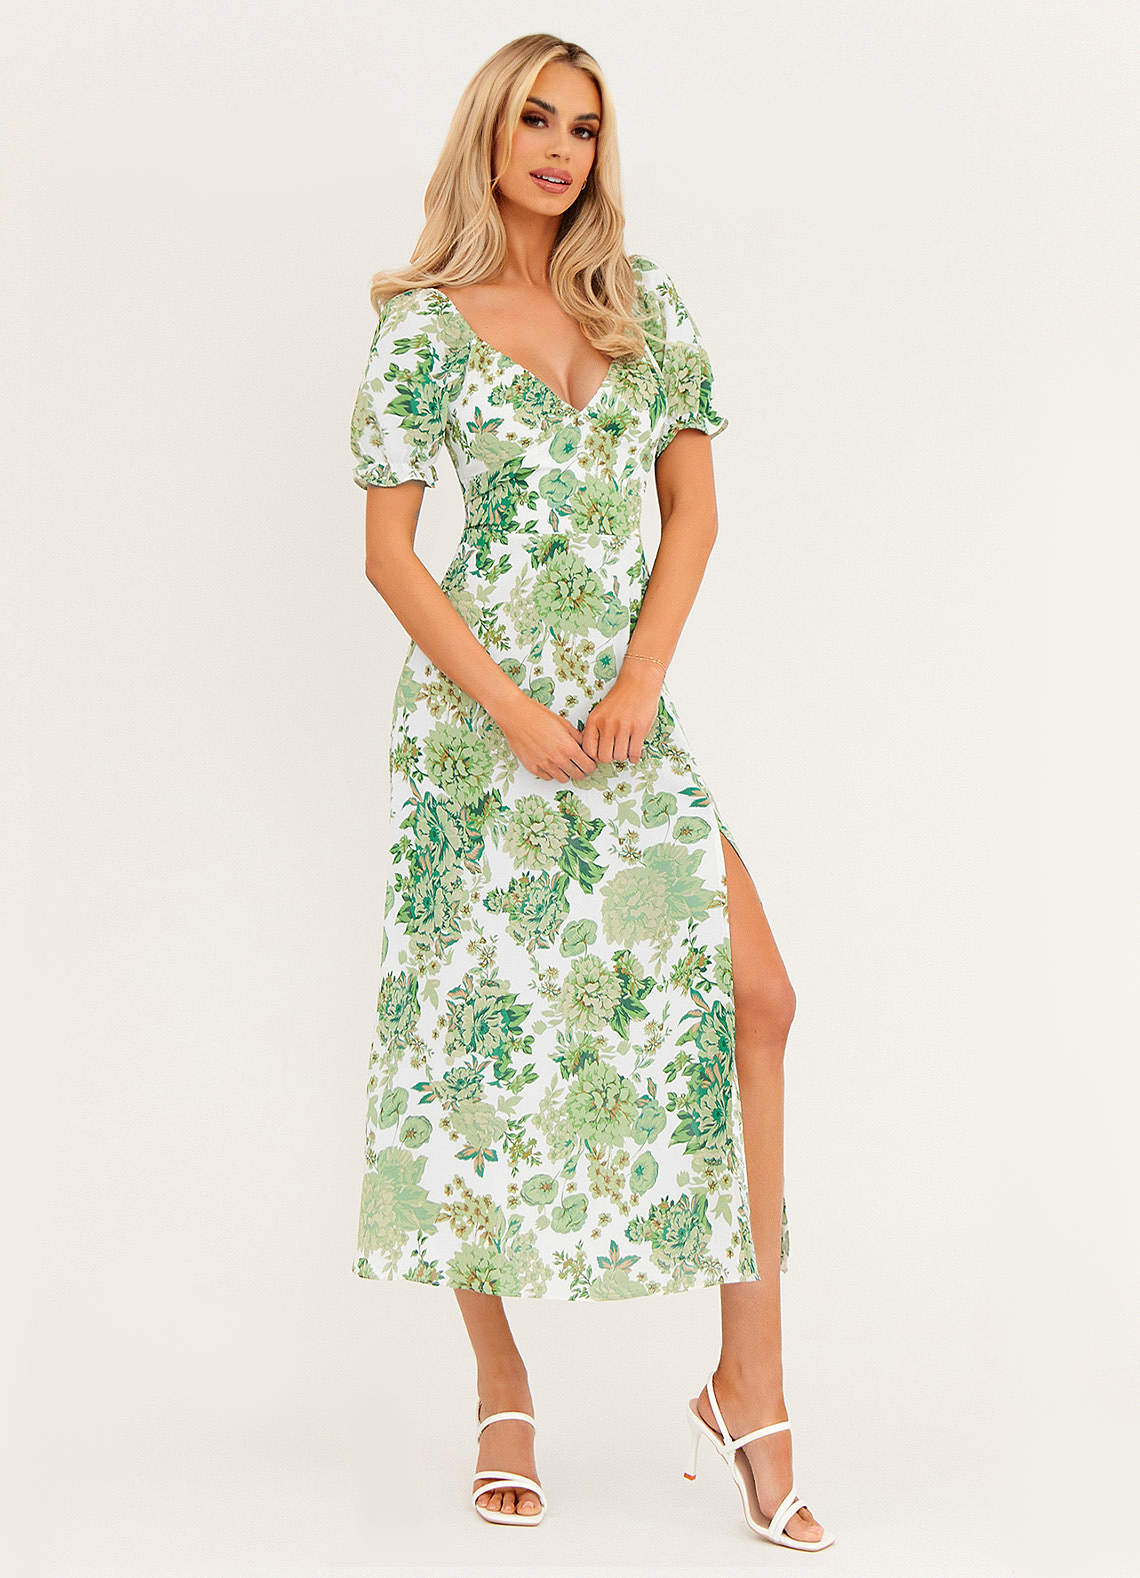 Sheridan French I Spring 2023 I Stacey Dress in Green Floral